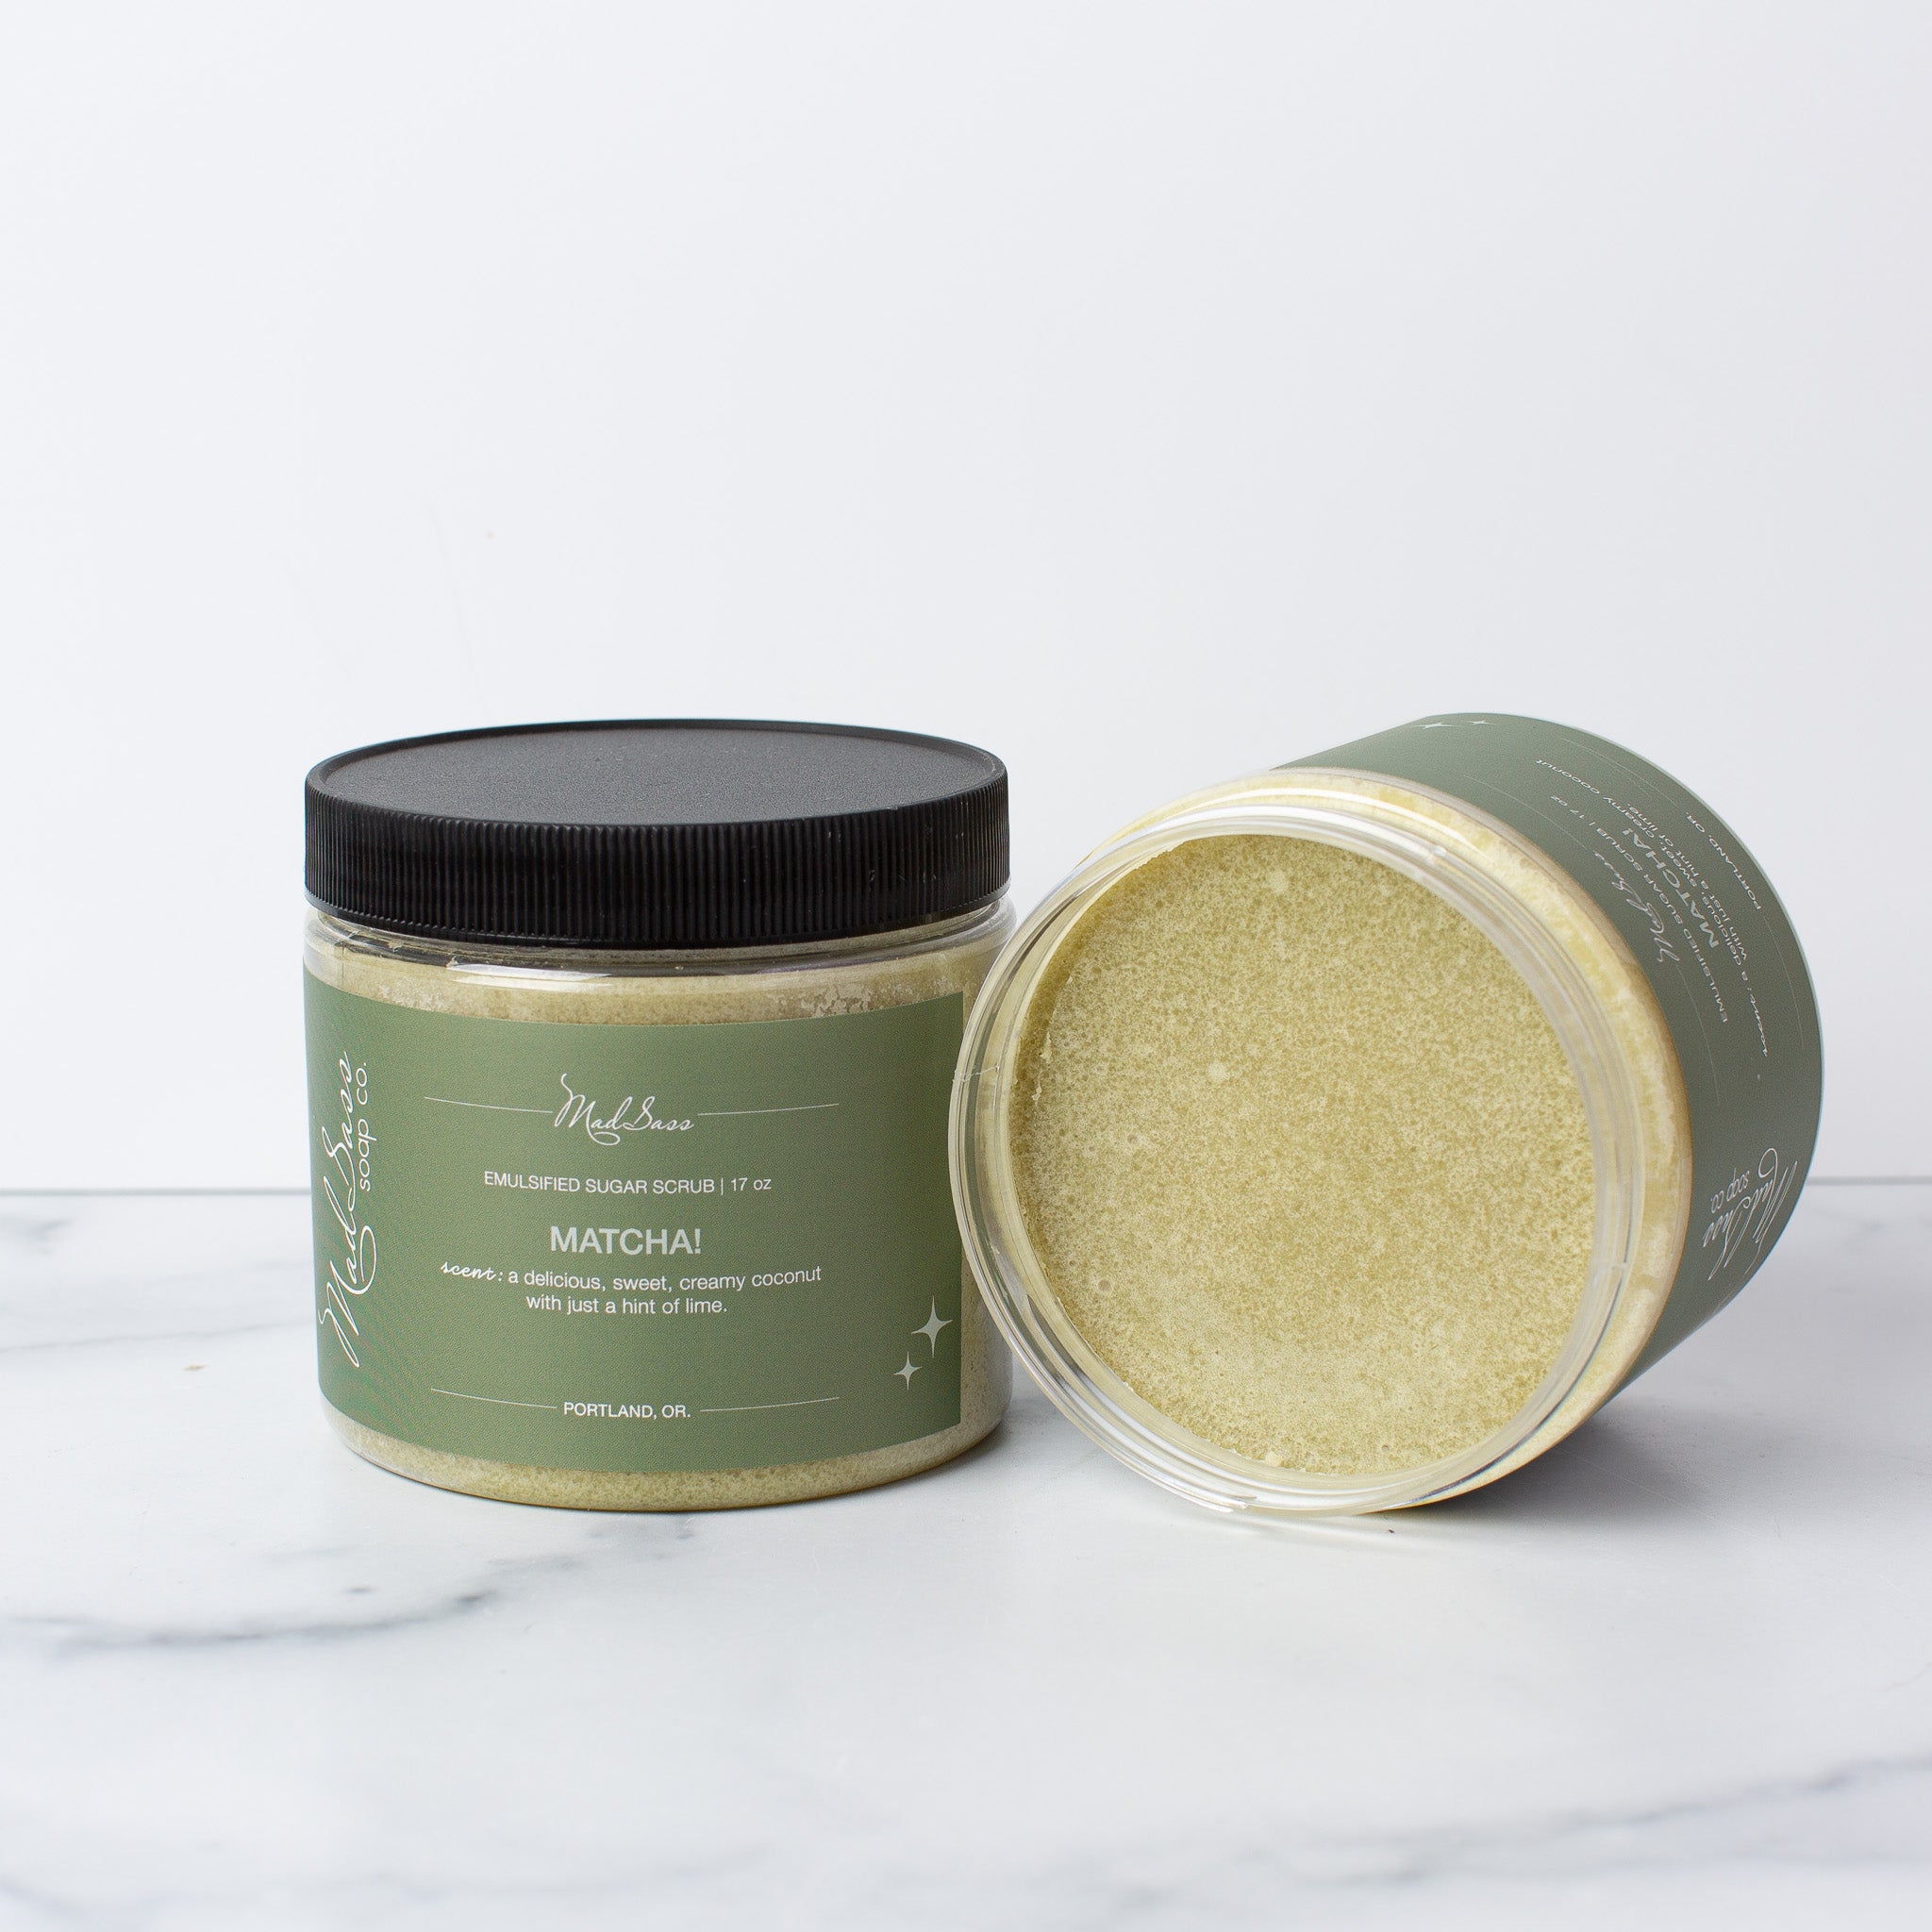 Two Matcha Emulsified Sugar Scrubs, with one on its side, on a white background.